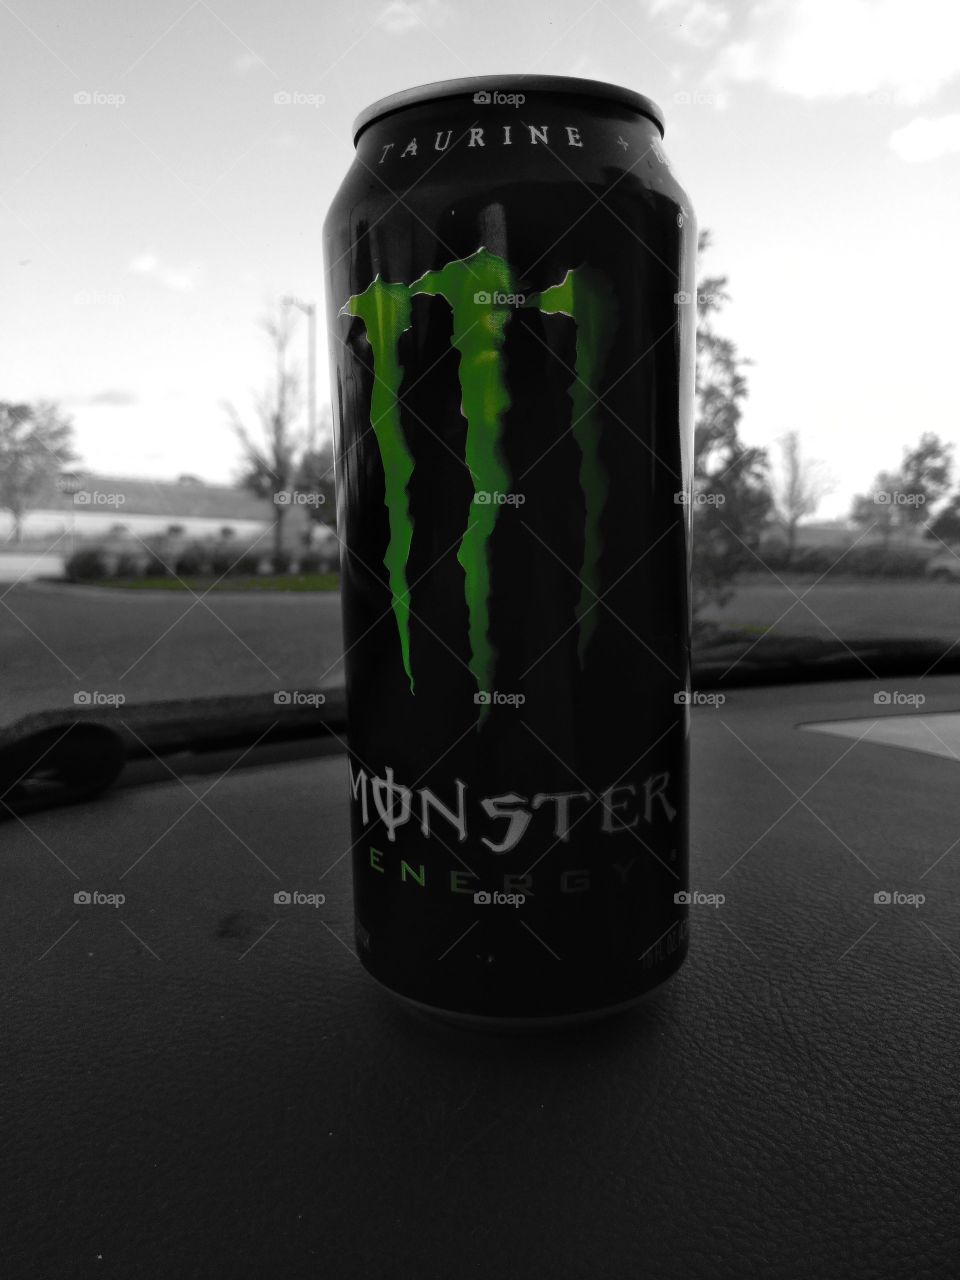 monster energy can in monocolor green